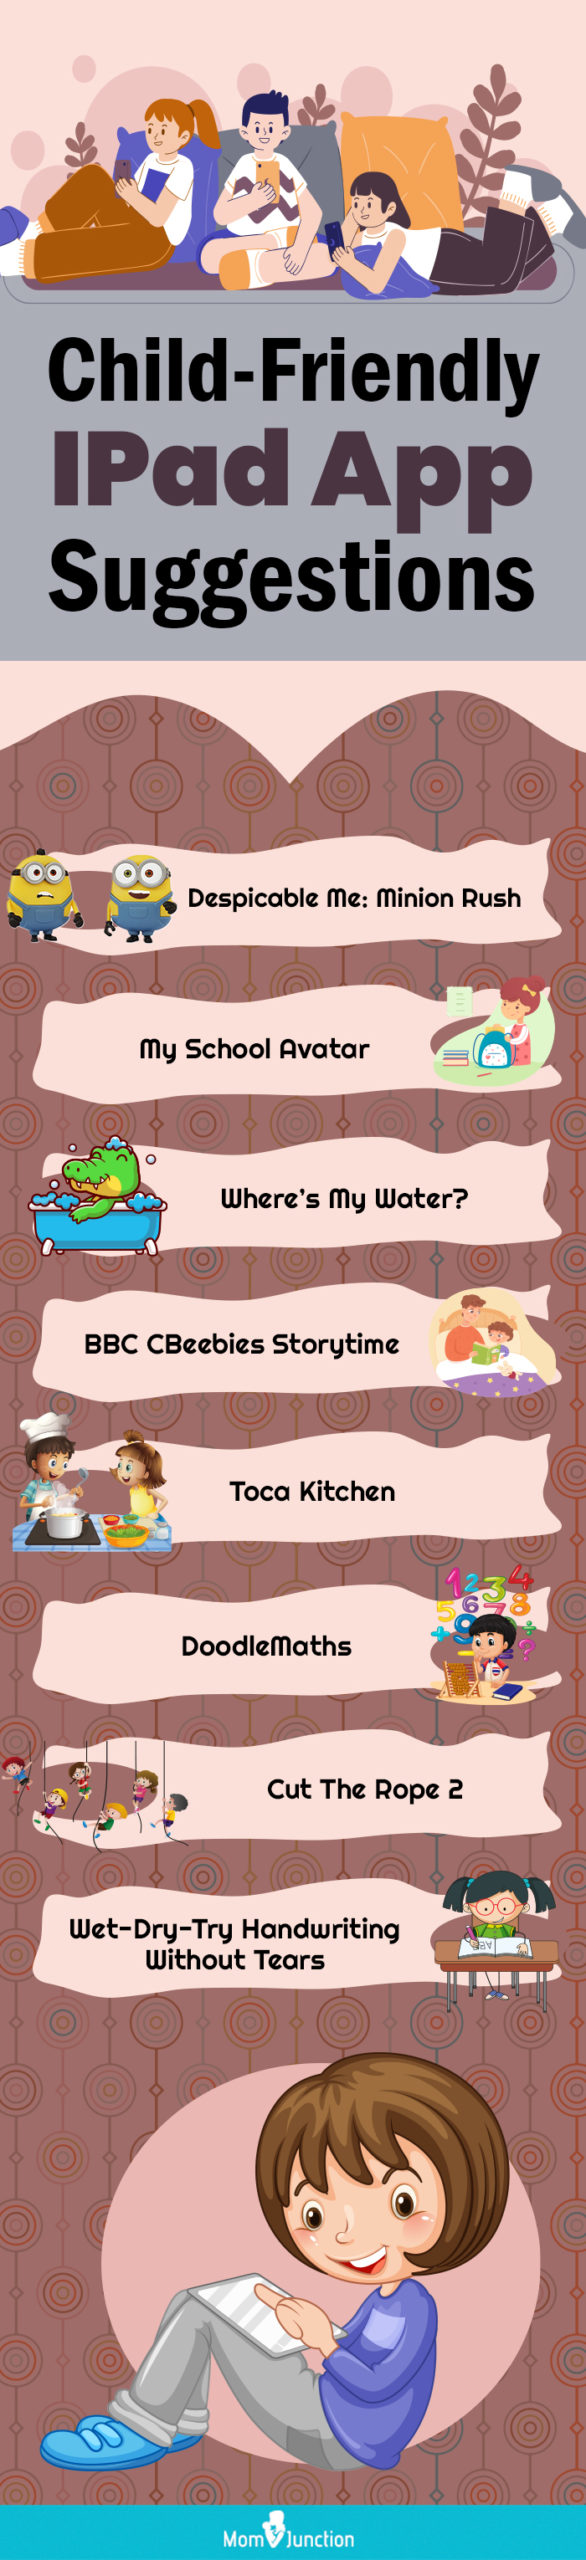 child friendly ipad app suggestions.jpg (infographic)